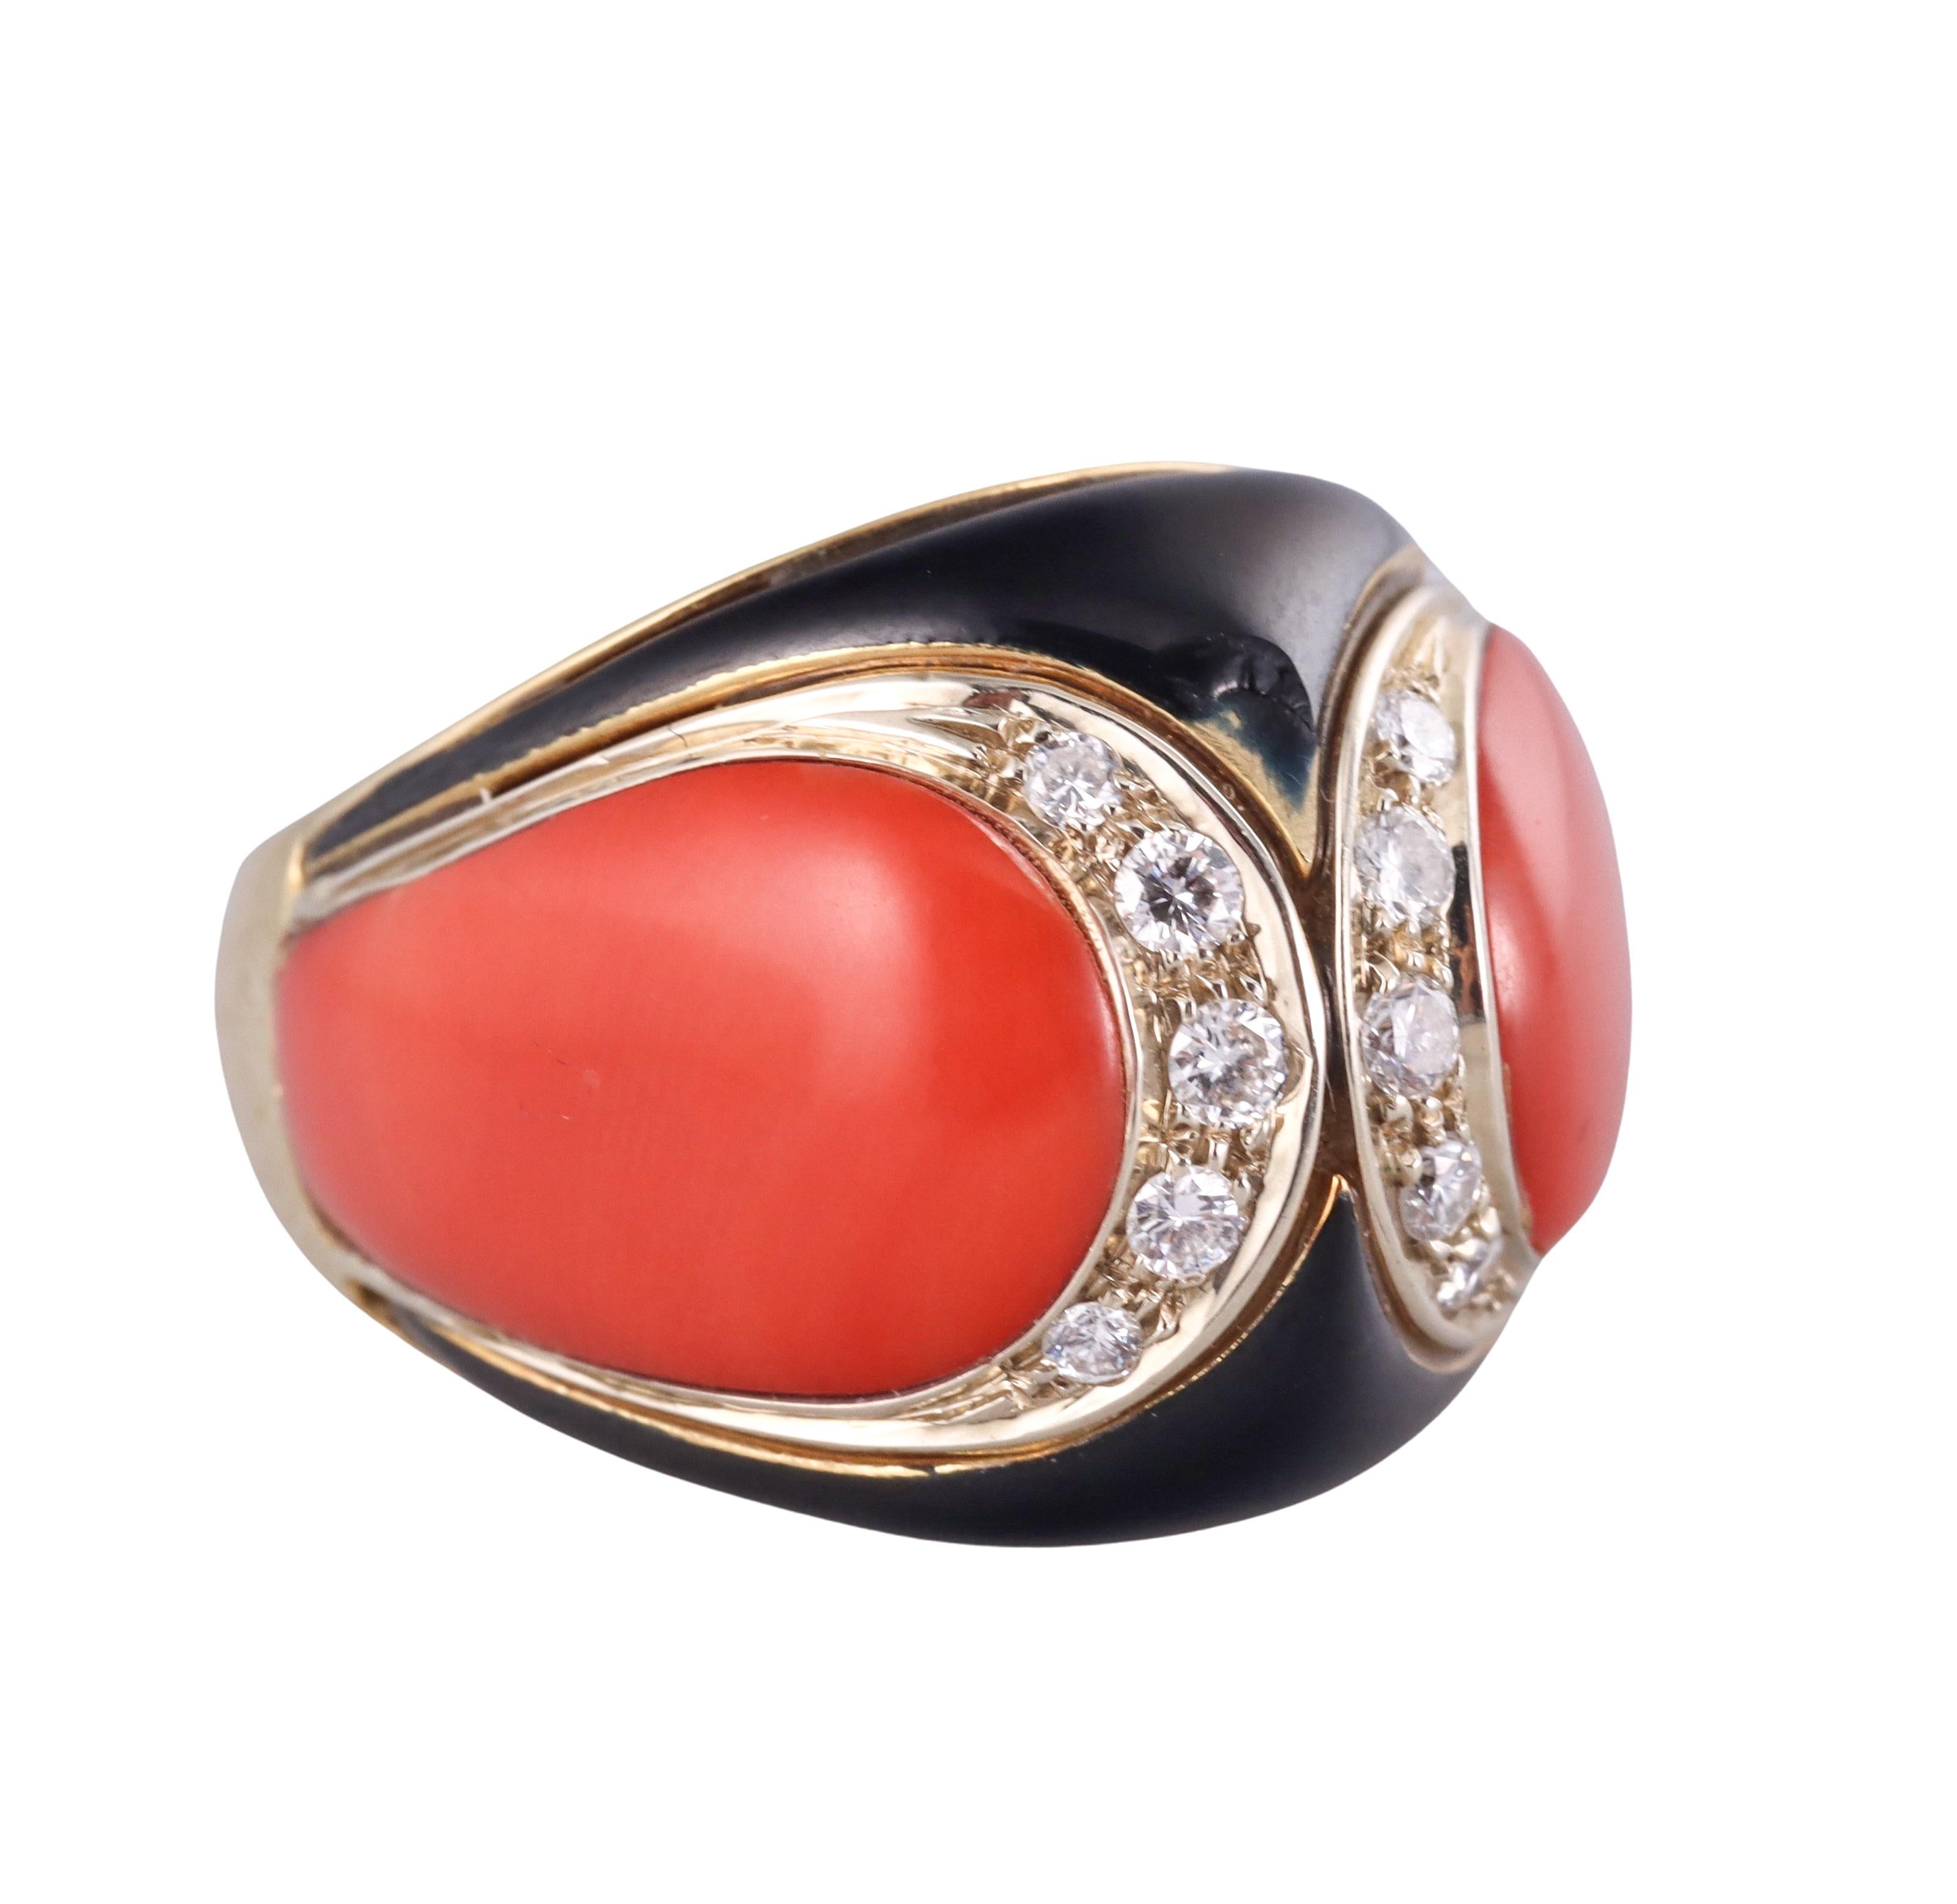 1970s vintage 18k gold dome ring, featuring coral and onyx top, with approx. 0.26ctw H/Si diamonds. Ring is a size 6, top of the ring is 18mm wide. Marked 750. Weight of the piece - 15.9 grams. 